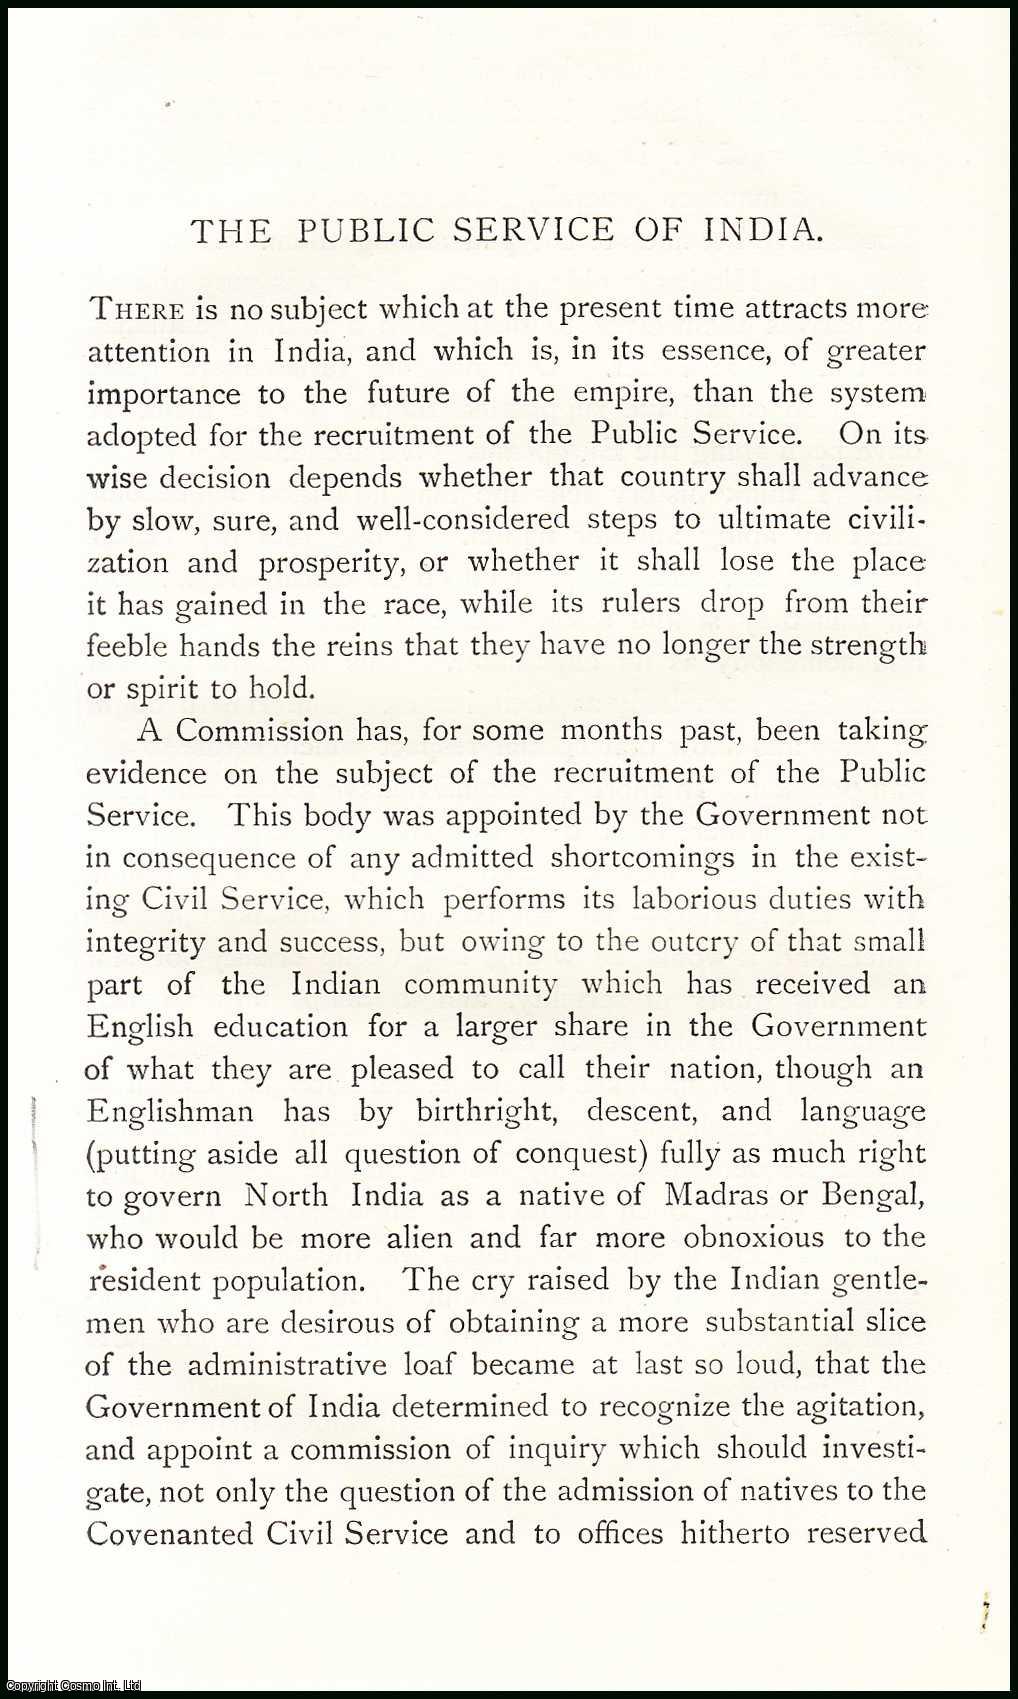 Lepel Griffin - The Public Service of India. An uncommon original article from The Asiatic Quarterly Review, 1887.